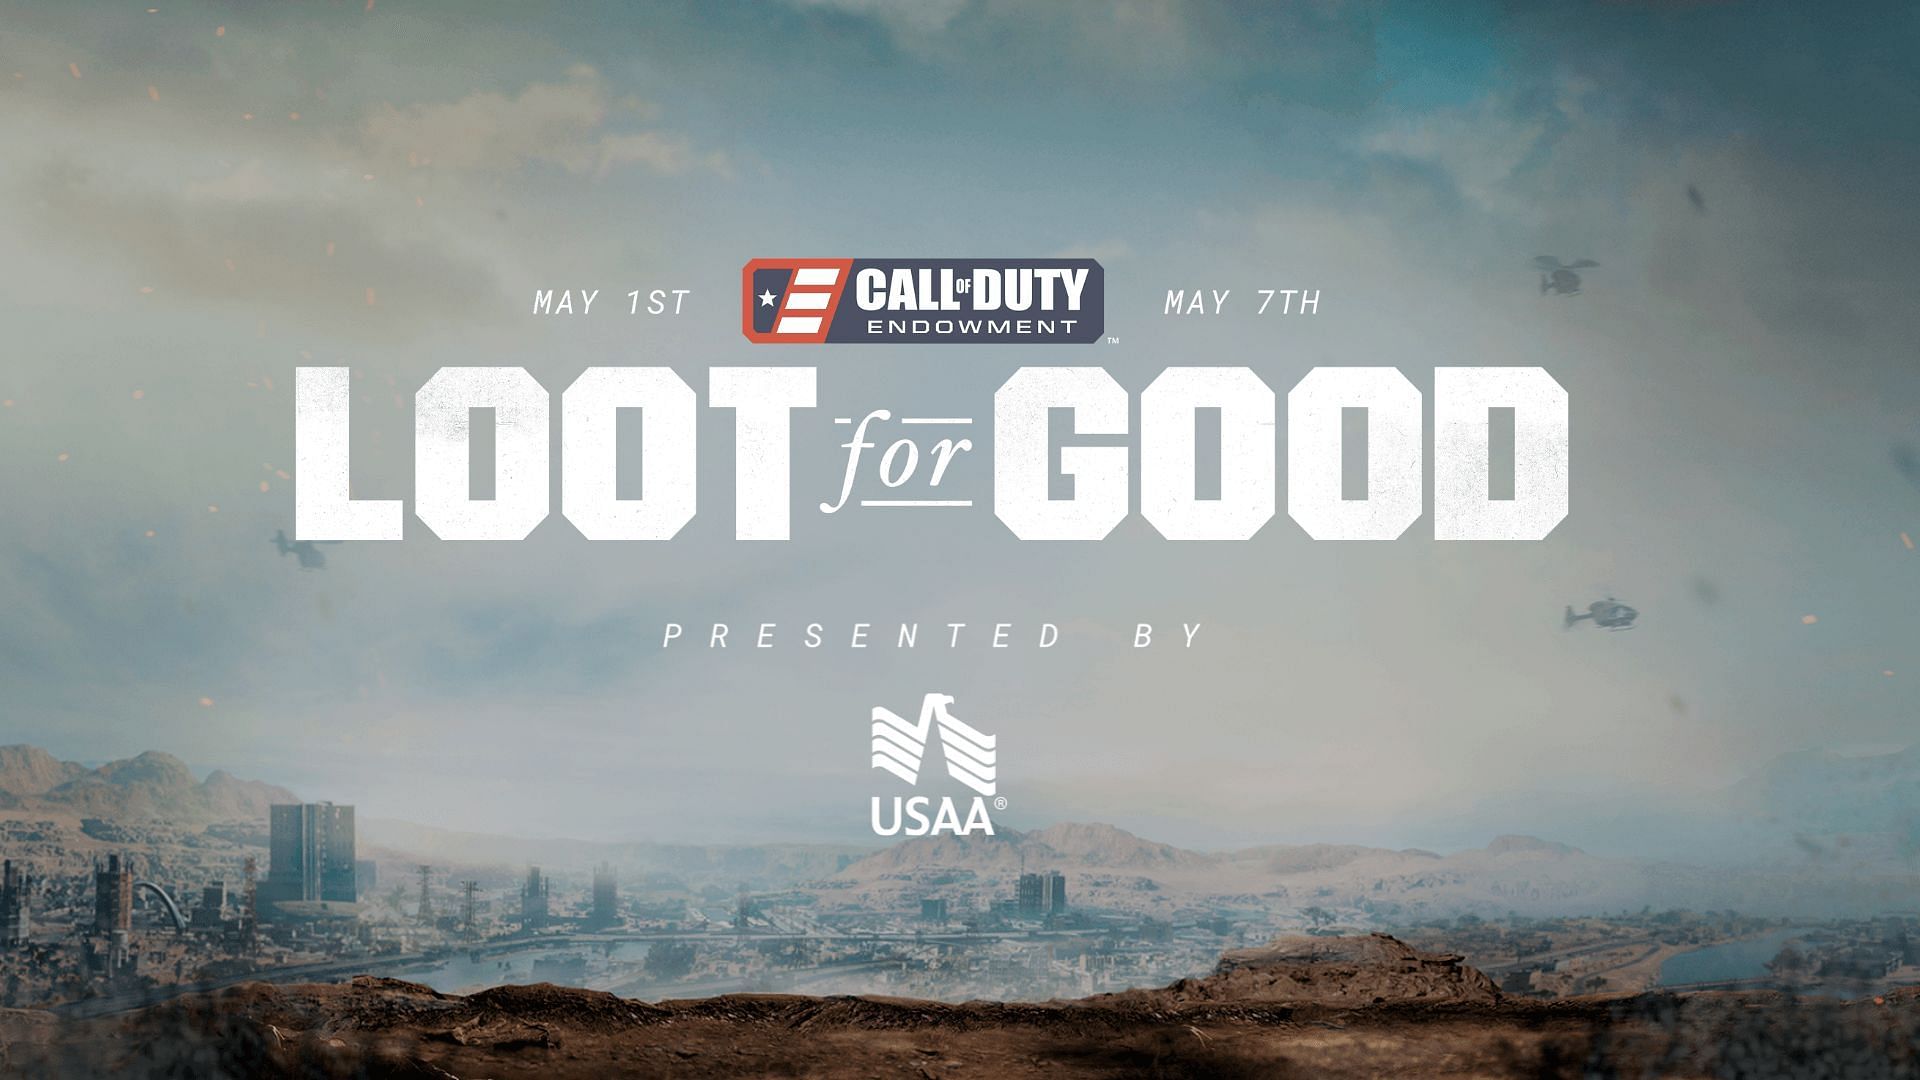 About the Loot for Good charitable event in Warzone 2 DMZ (image via Activision)